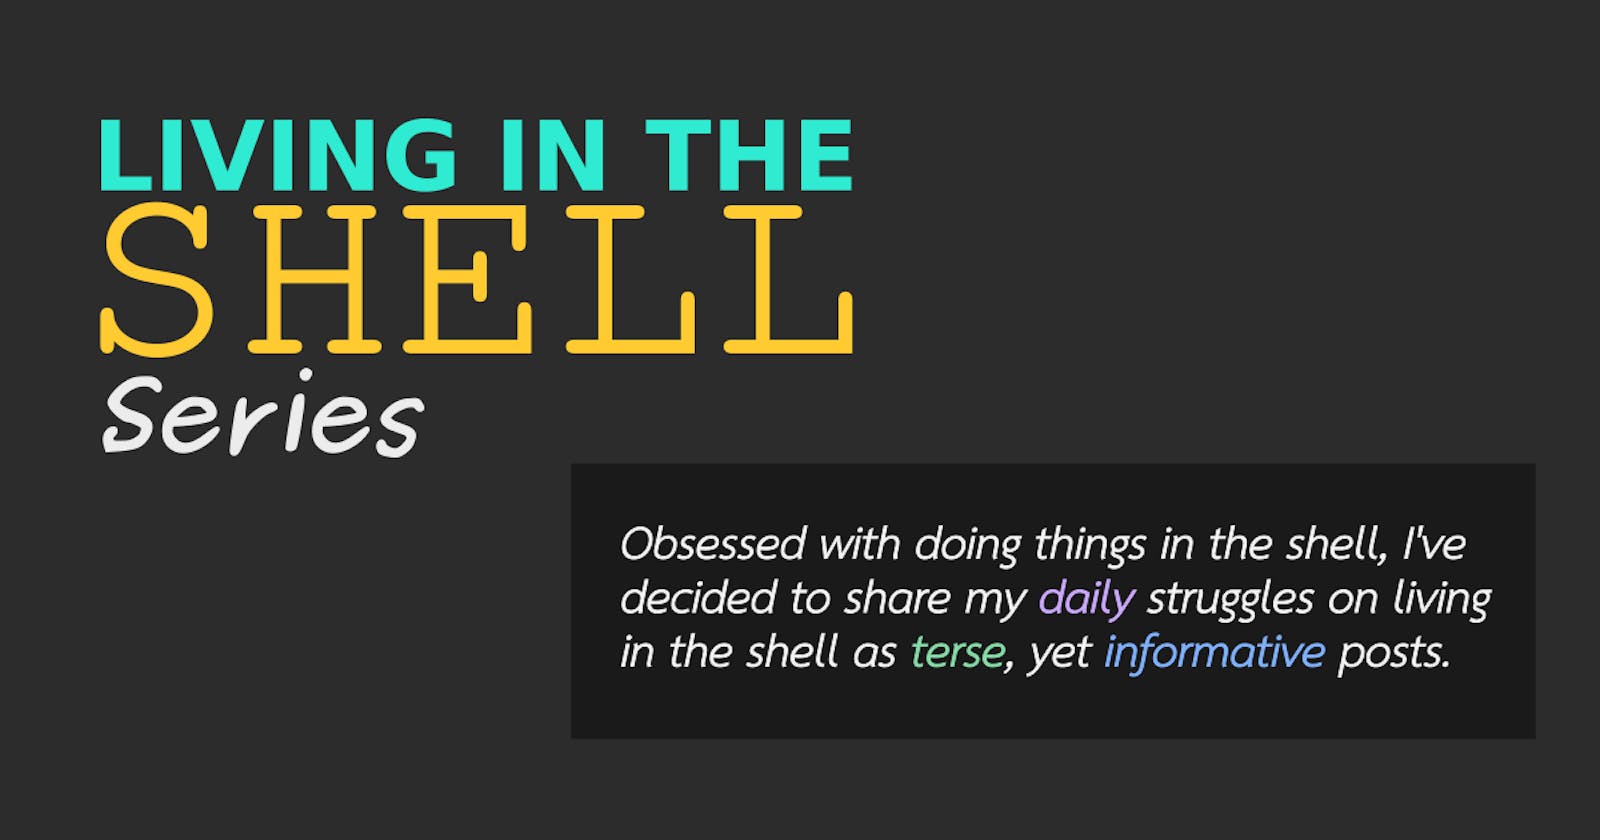 Living in the Shell #21; head (Display File Content From Beginning)